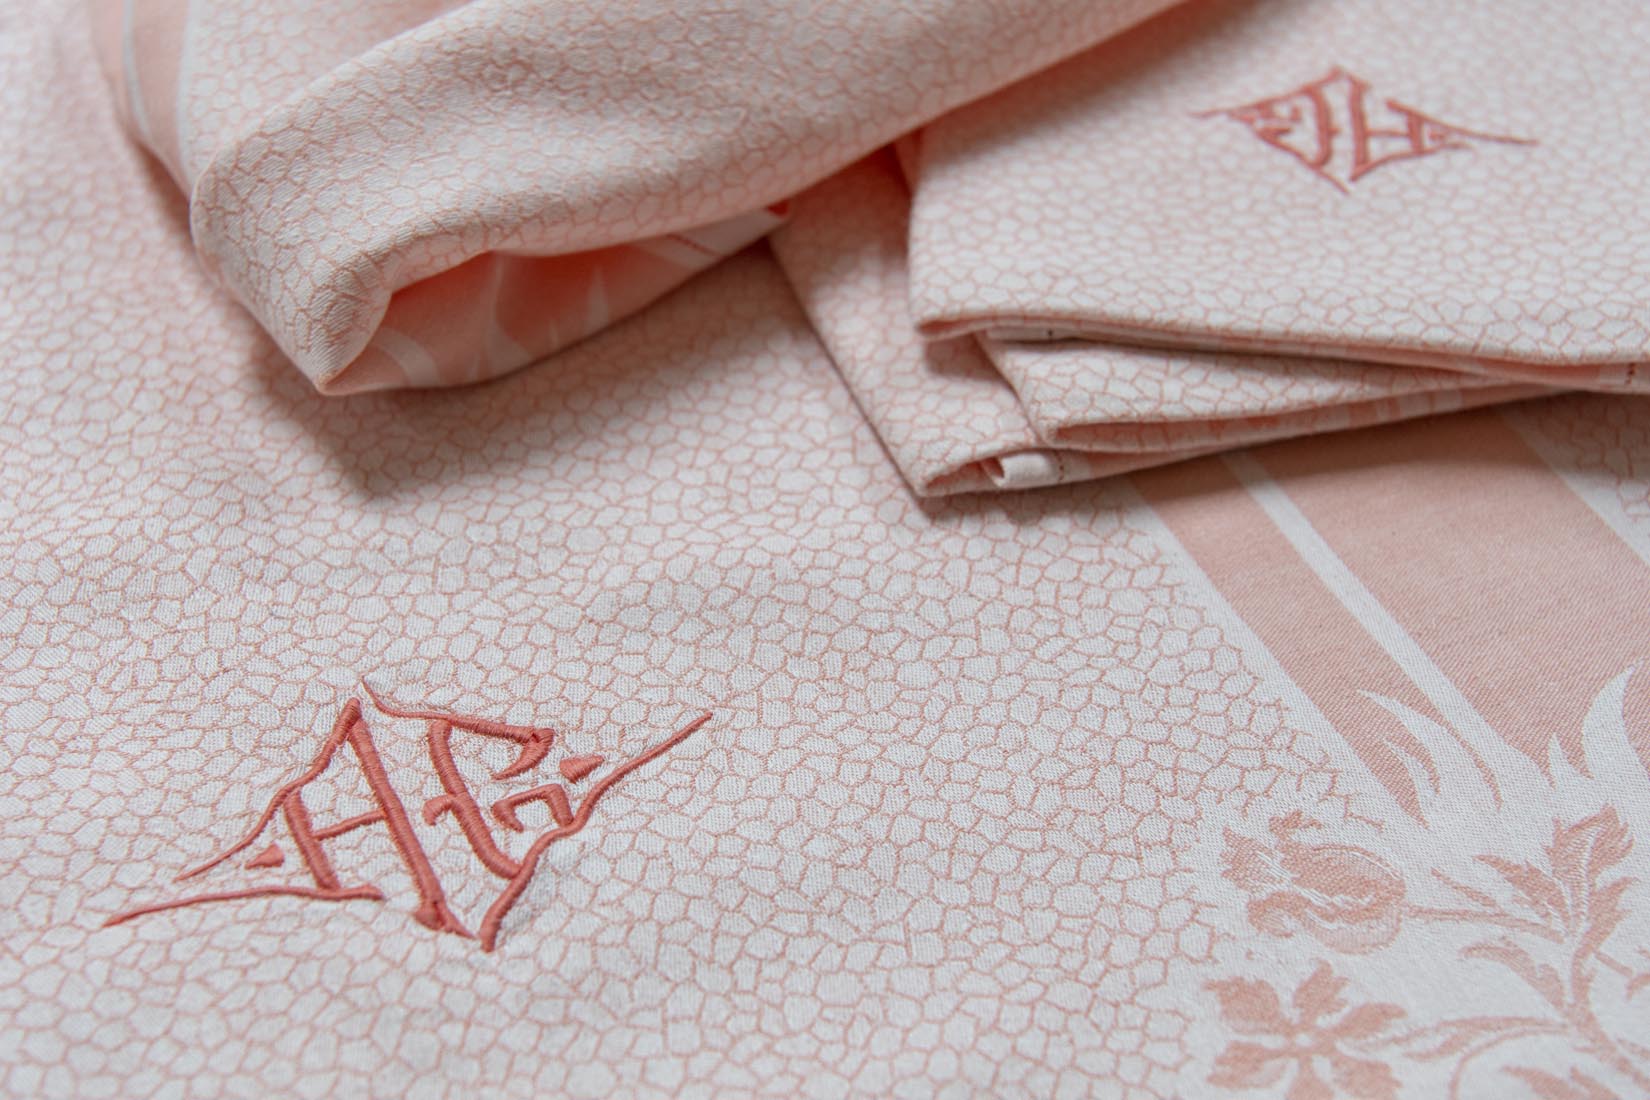 Coral pink damask tablecloth and napkins with double letter monogram AG - Natalia Willmott